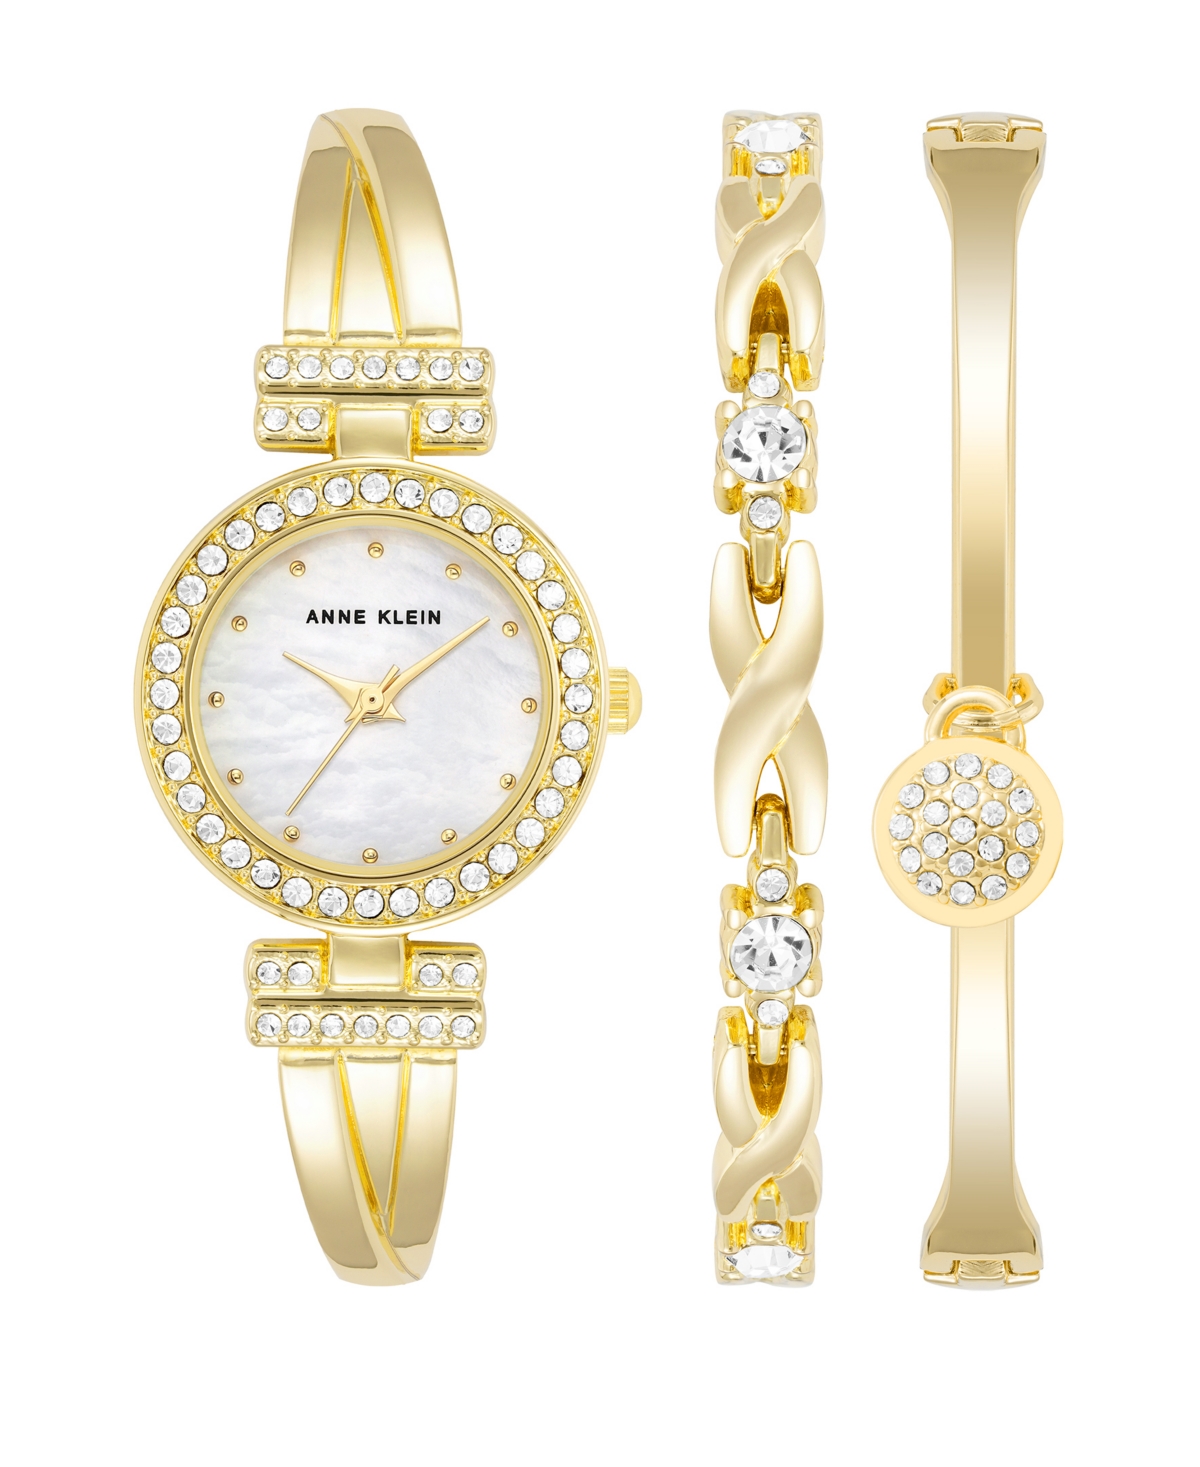 Anne Klein Women's Gold-tone Alloy Bangle With Crystals Fashion Watch 24mm And Bracelet Set